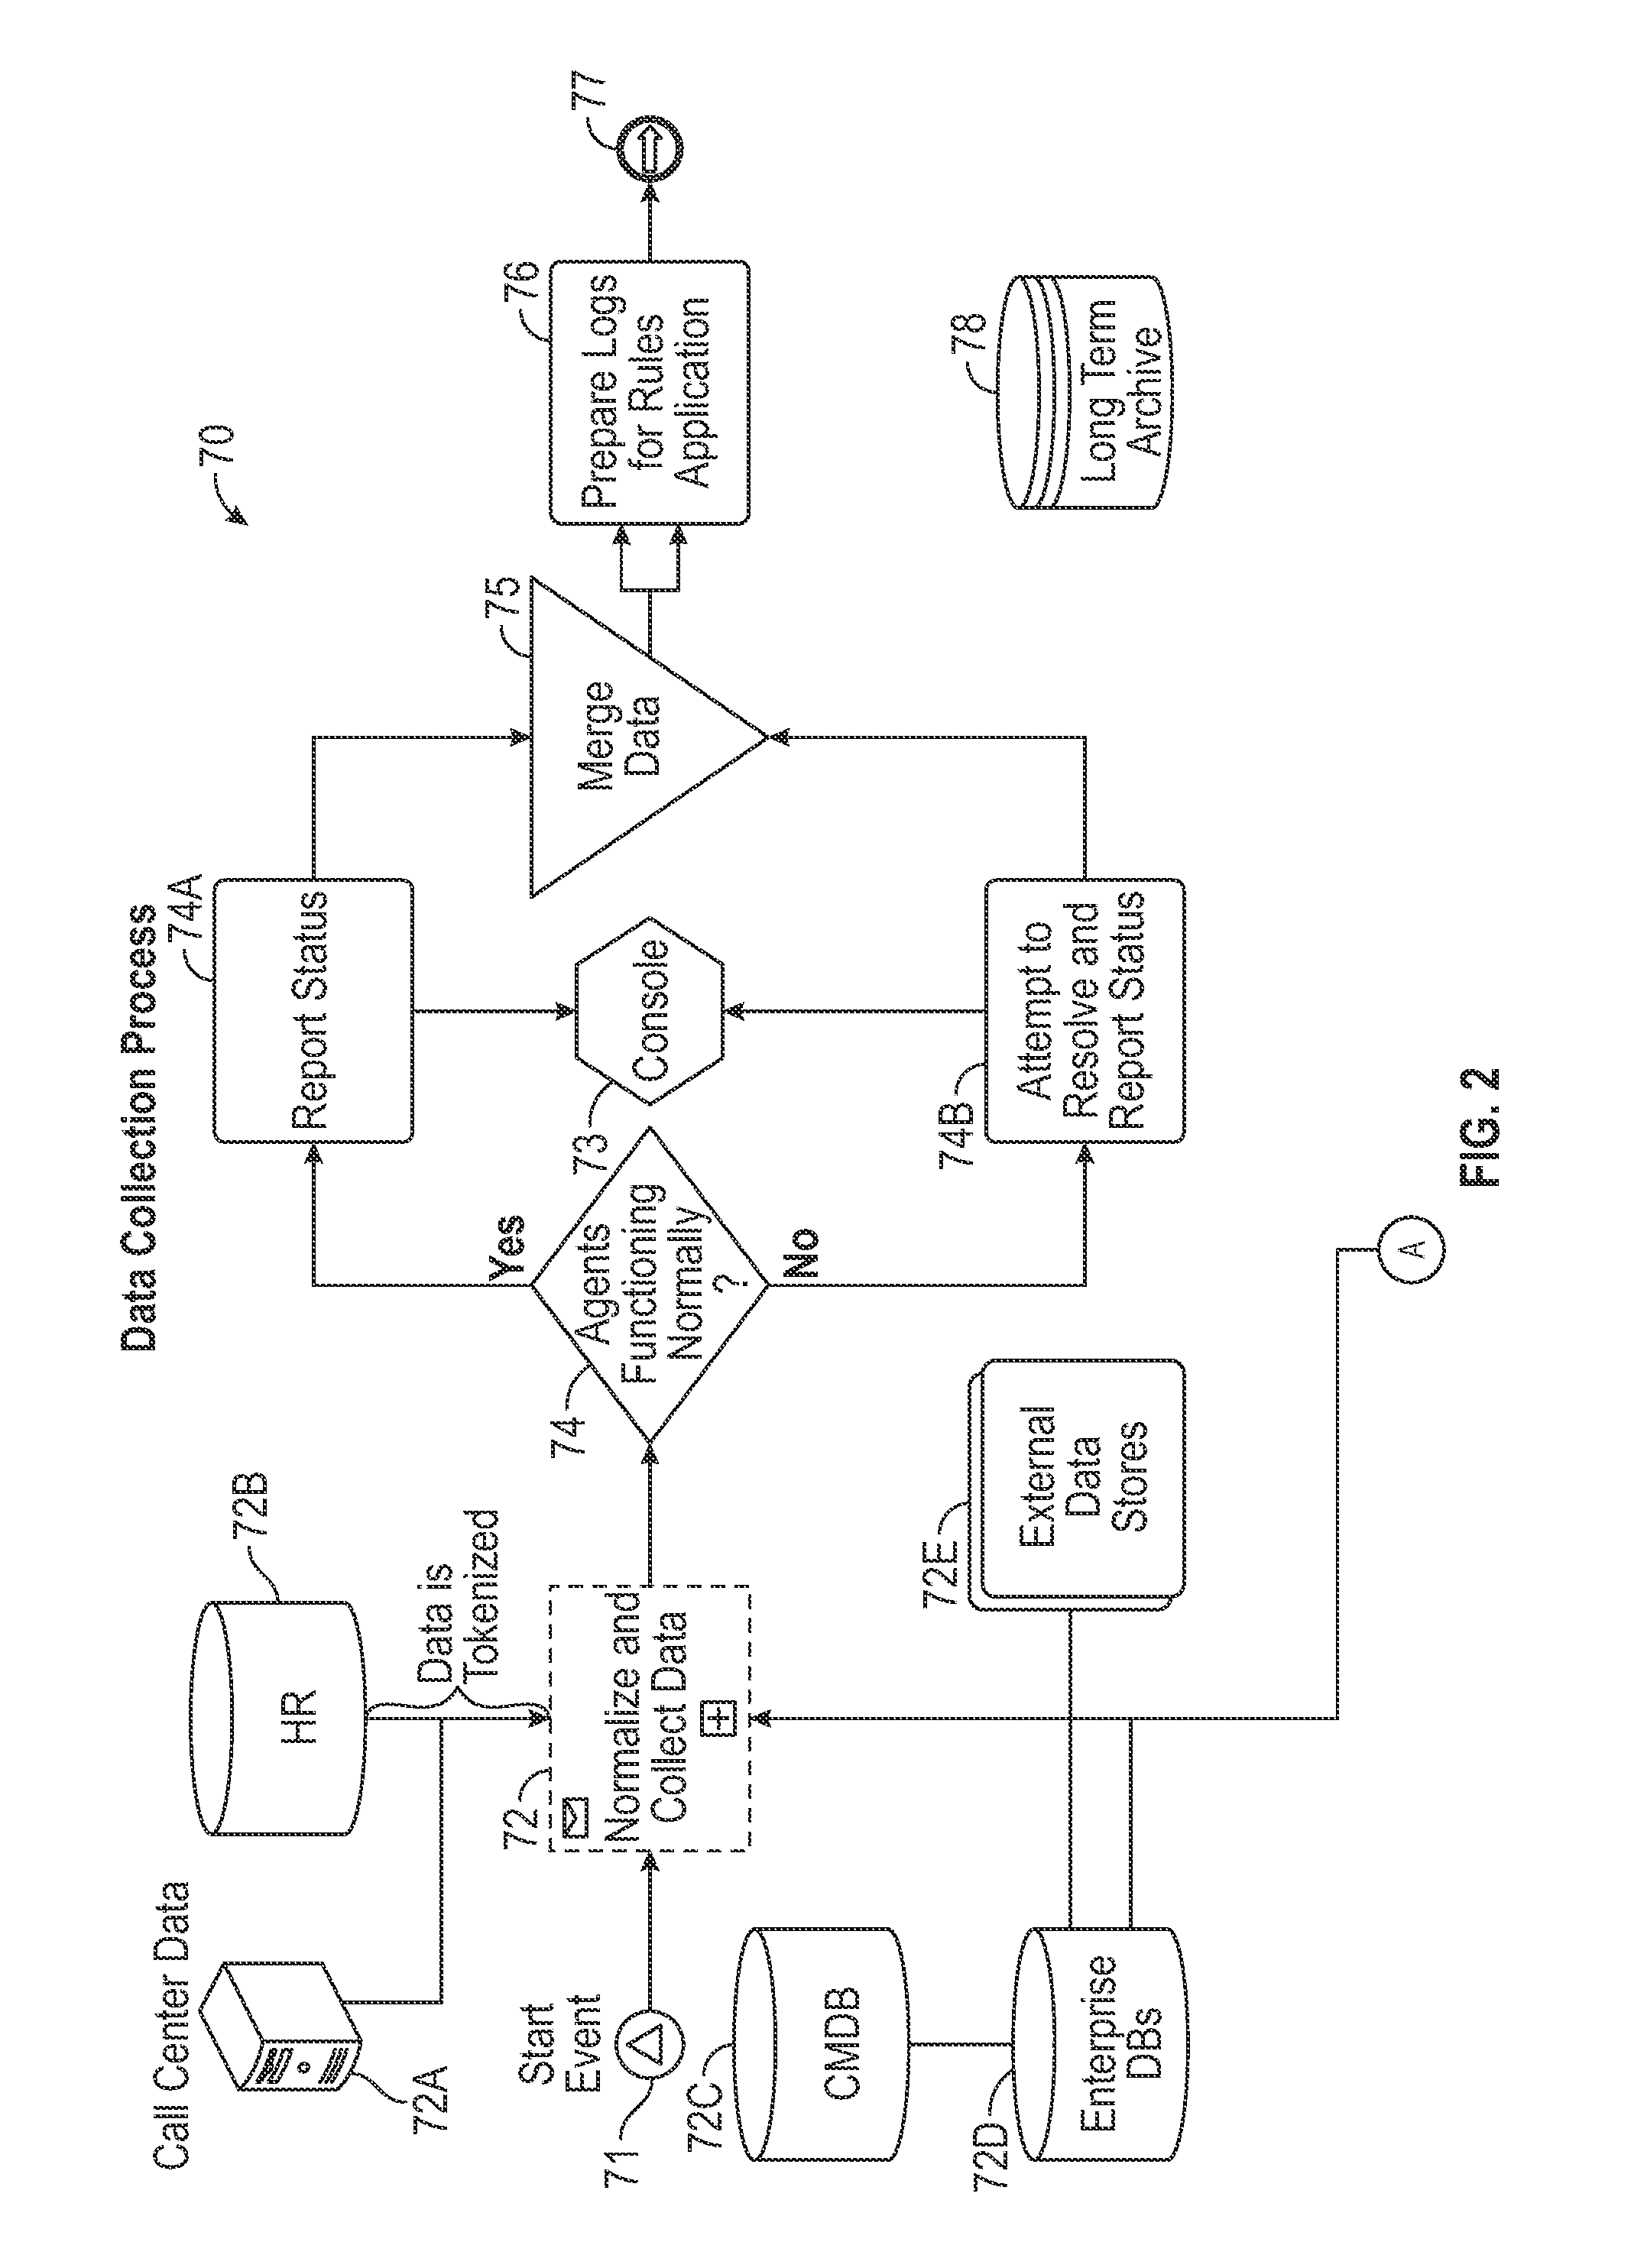 System and Method for Predicting Impending Cyber Security Events Using Multi Channel Behavioral Analysis in a Distributed Computing Environment